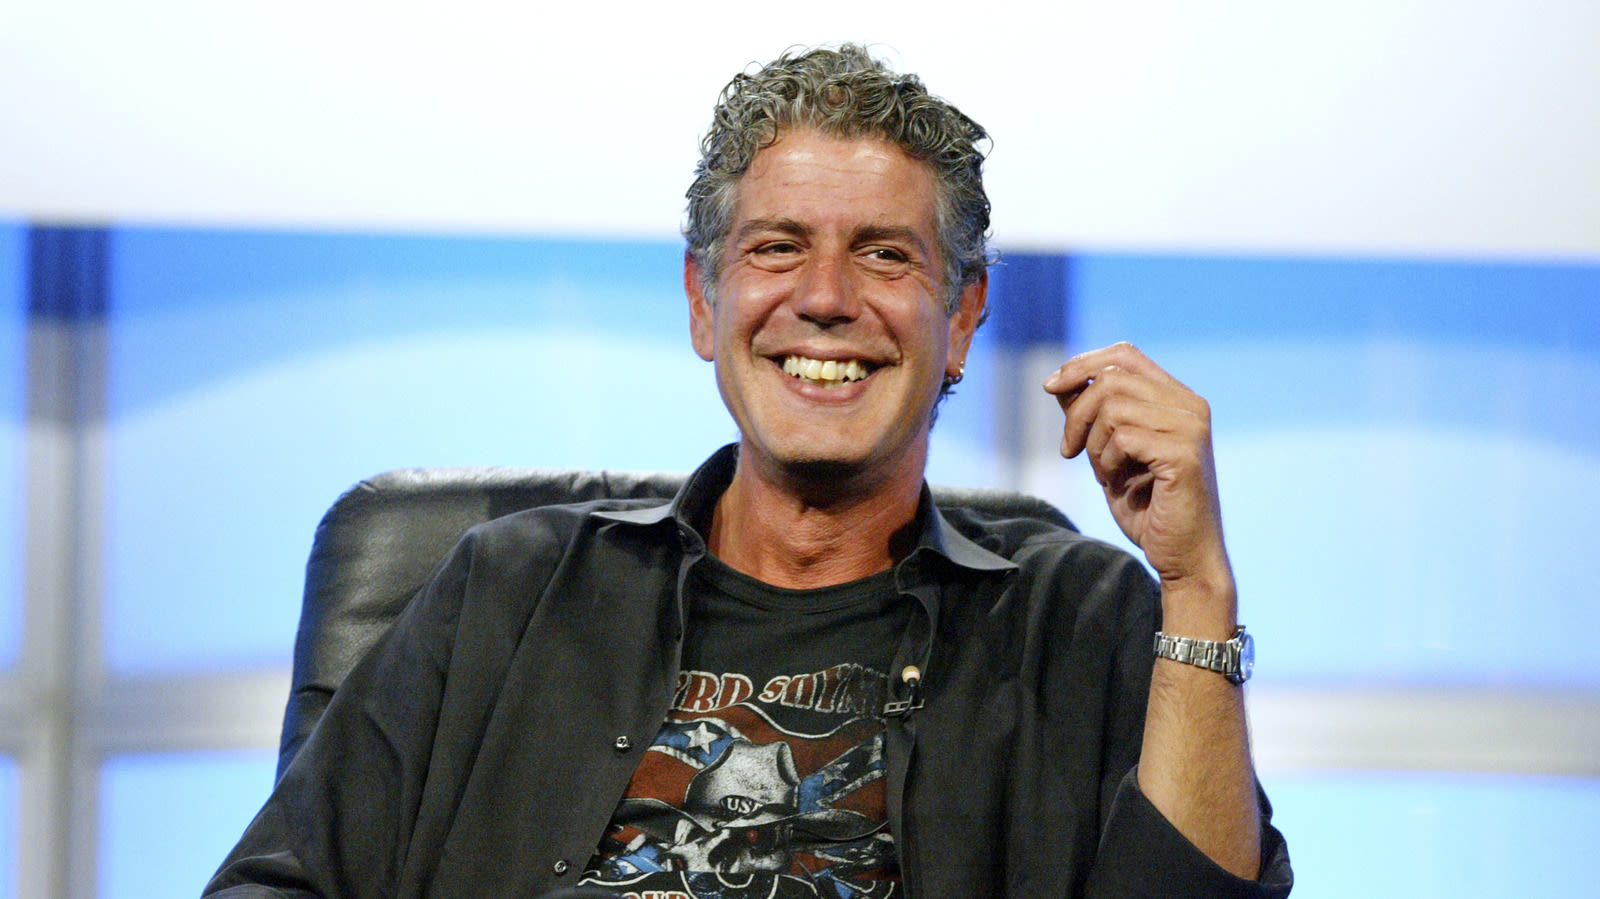 The Type Of Burger Anthony Bourdain Loathed With A Passion